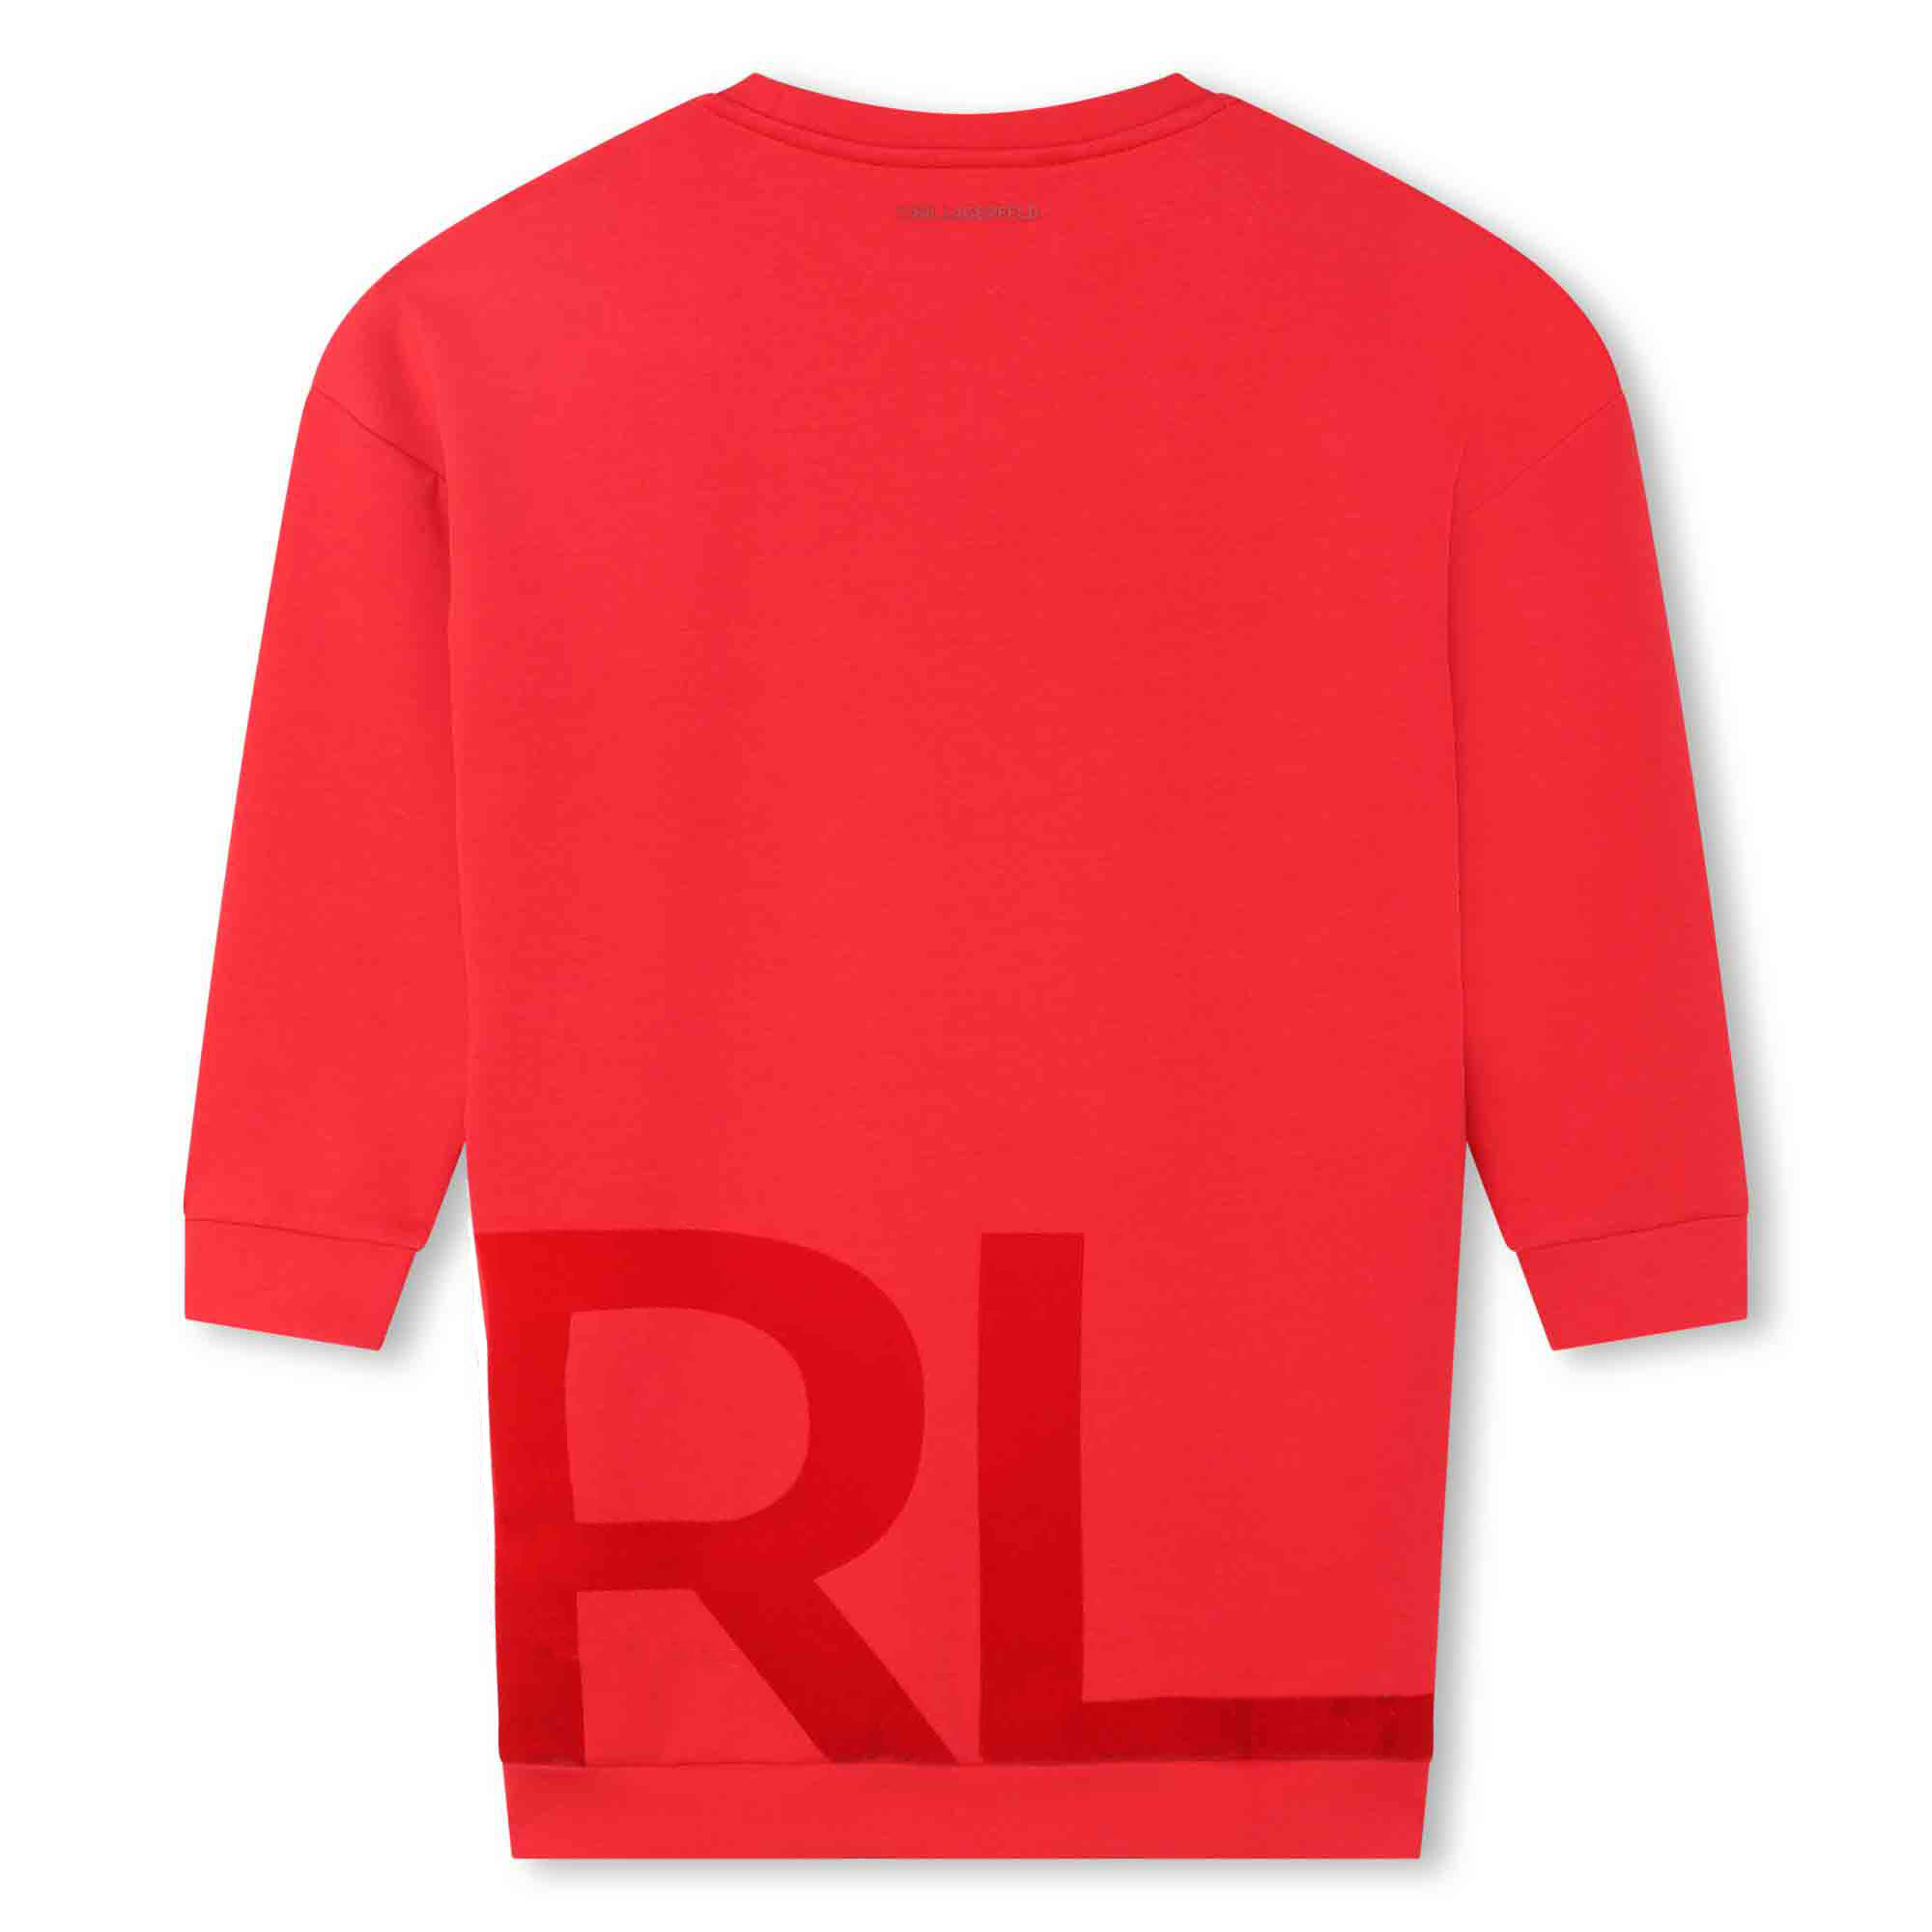 Robe sweat-shirt ample KARL LAGERFELD KIDS pour FILLE